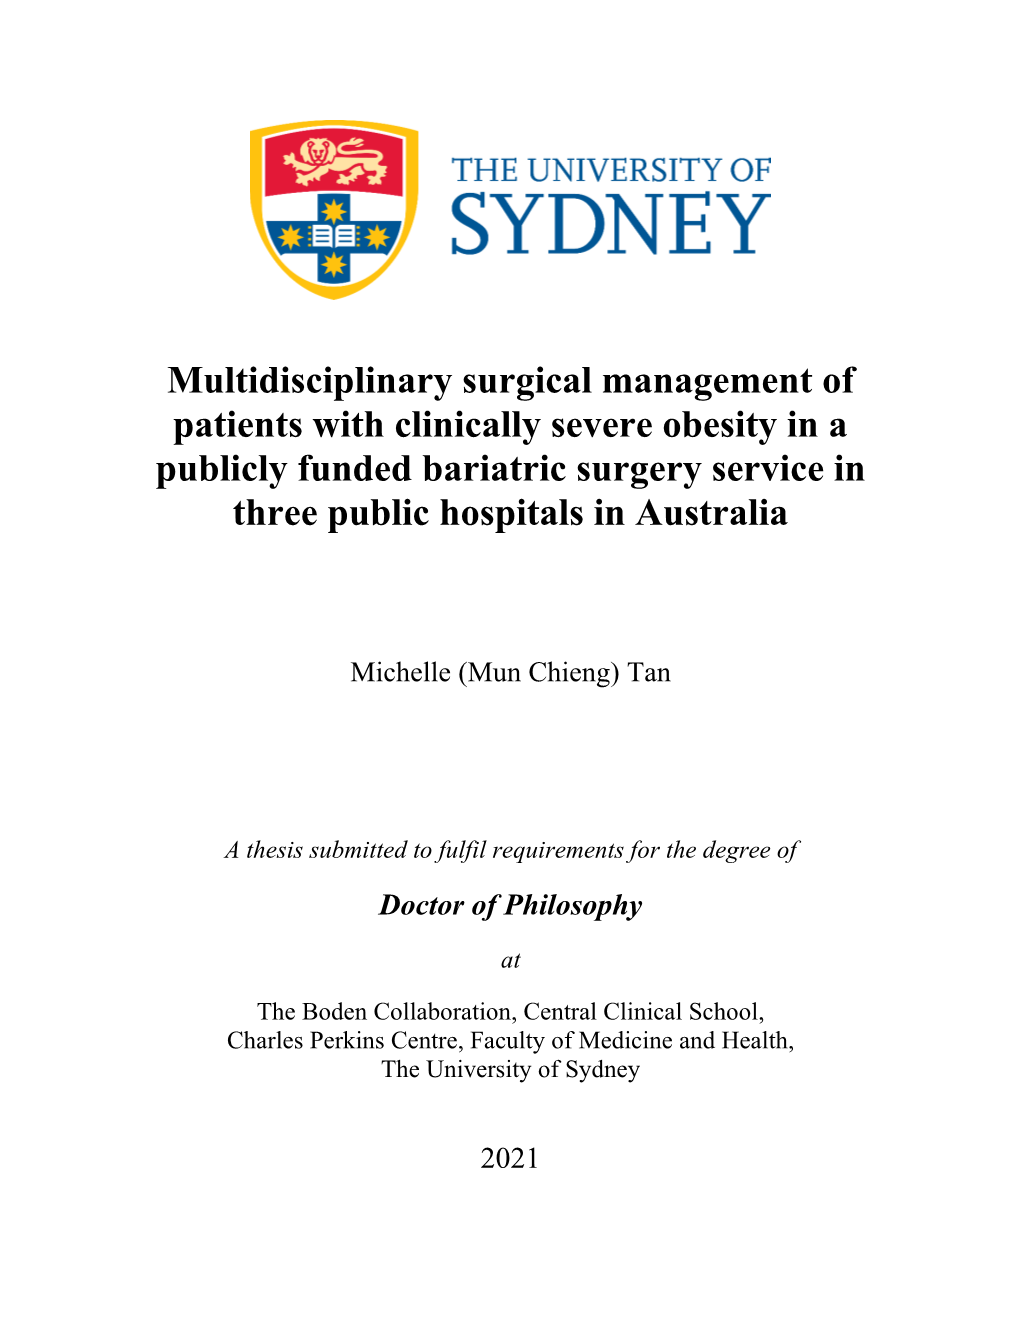 Multidisciplinary Surgical Management of Patients with Clinically Severe